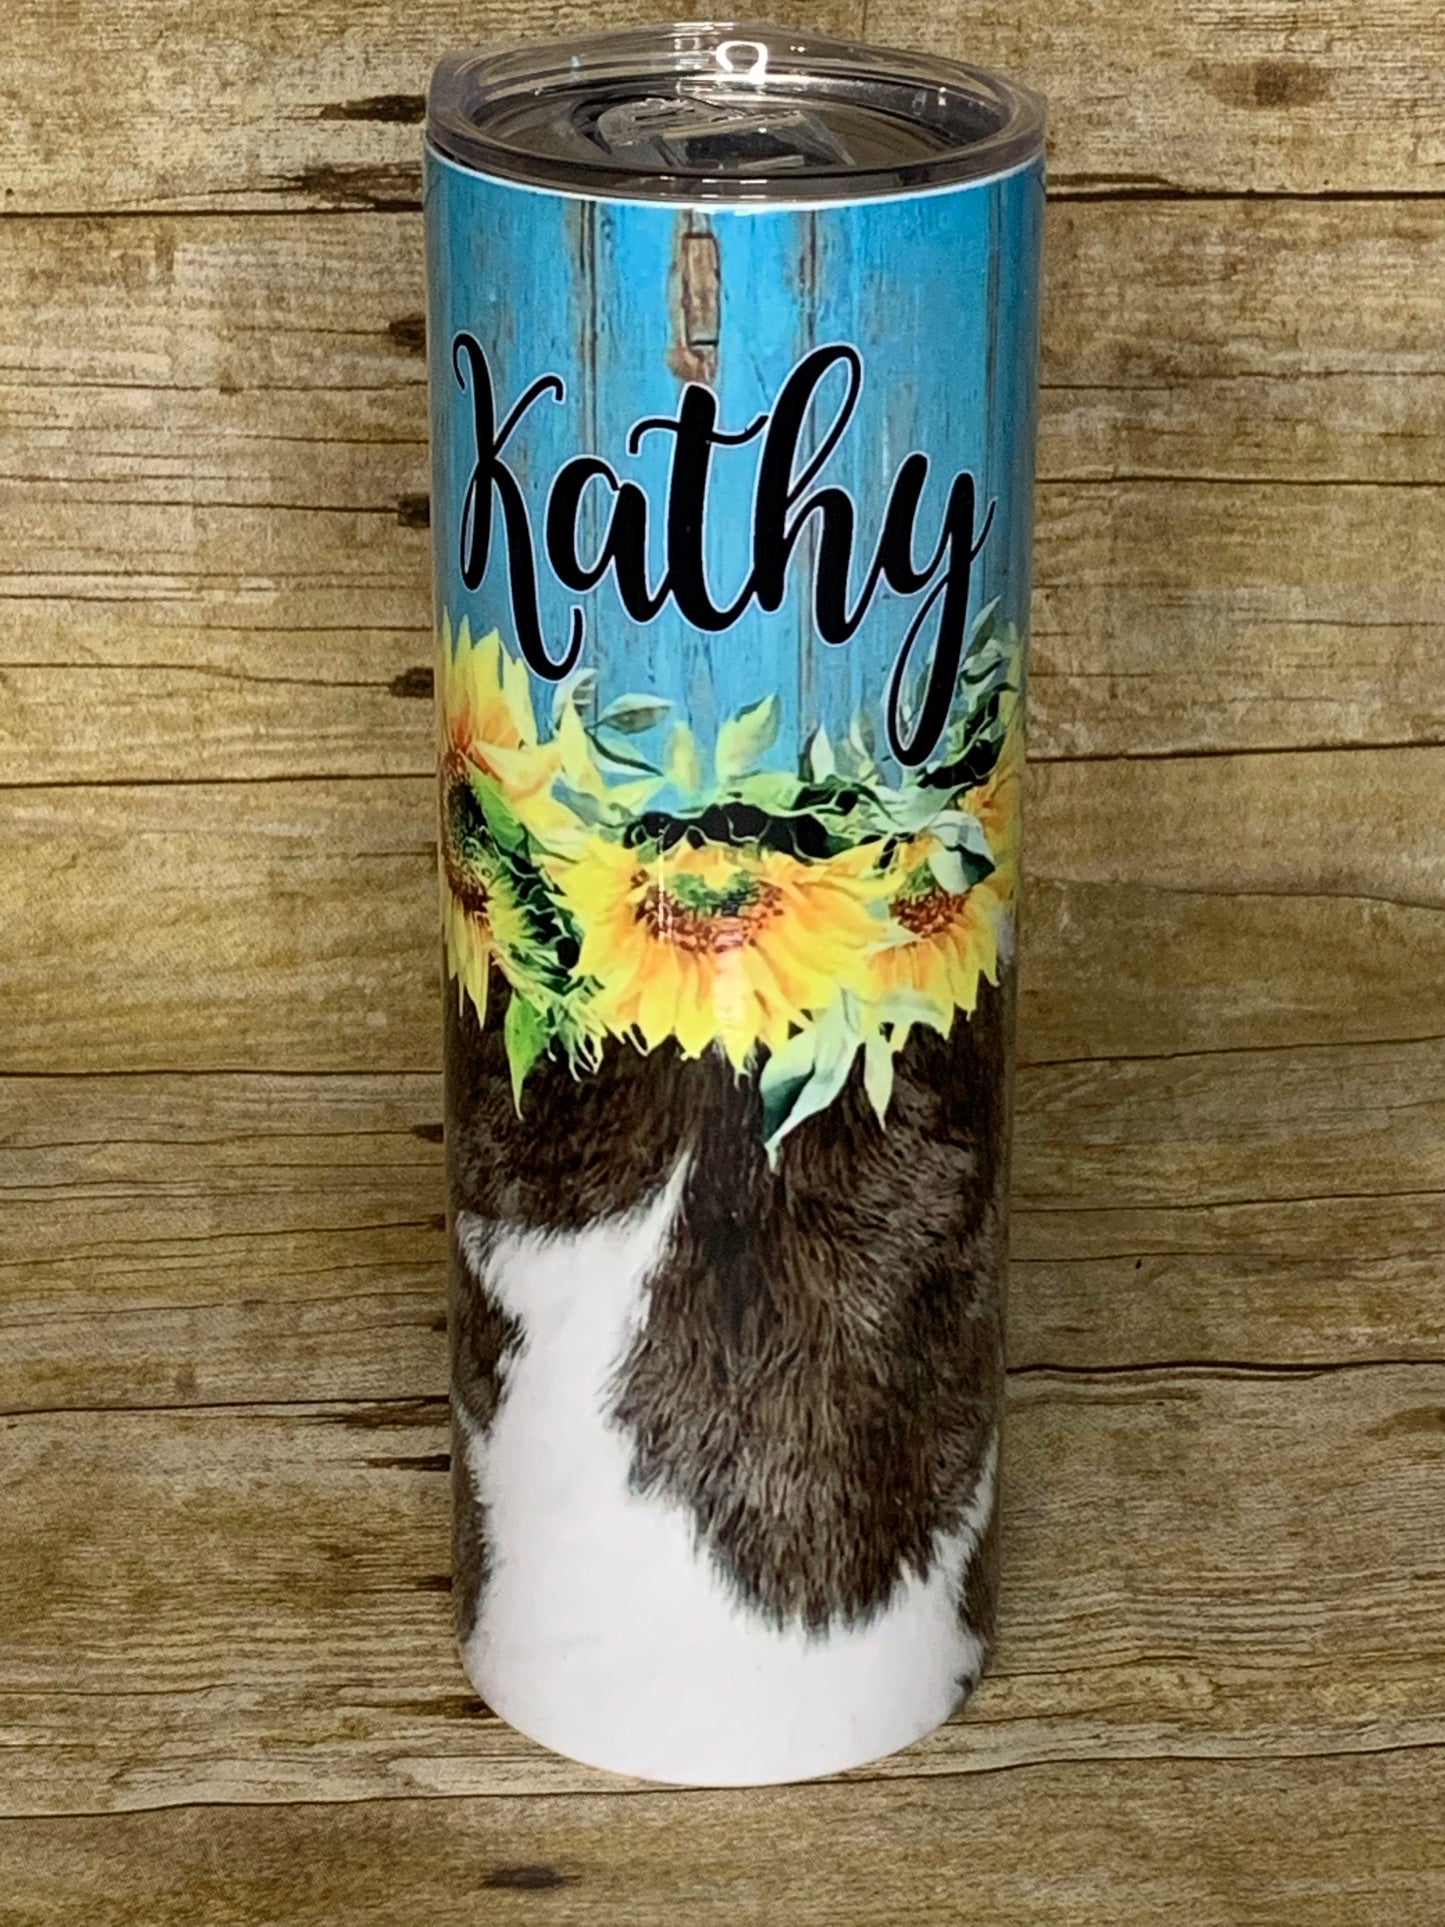 Cow Print and Sunflowers Personalized 20oz Insulated Tumbler with Lid and  Straw